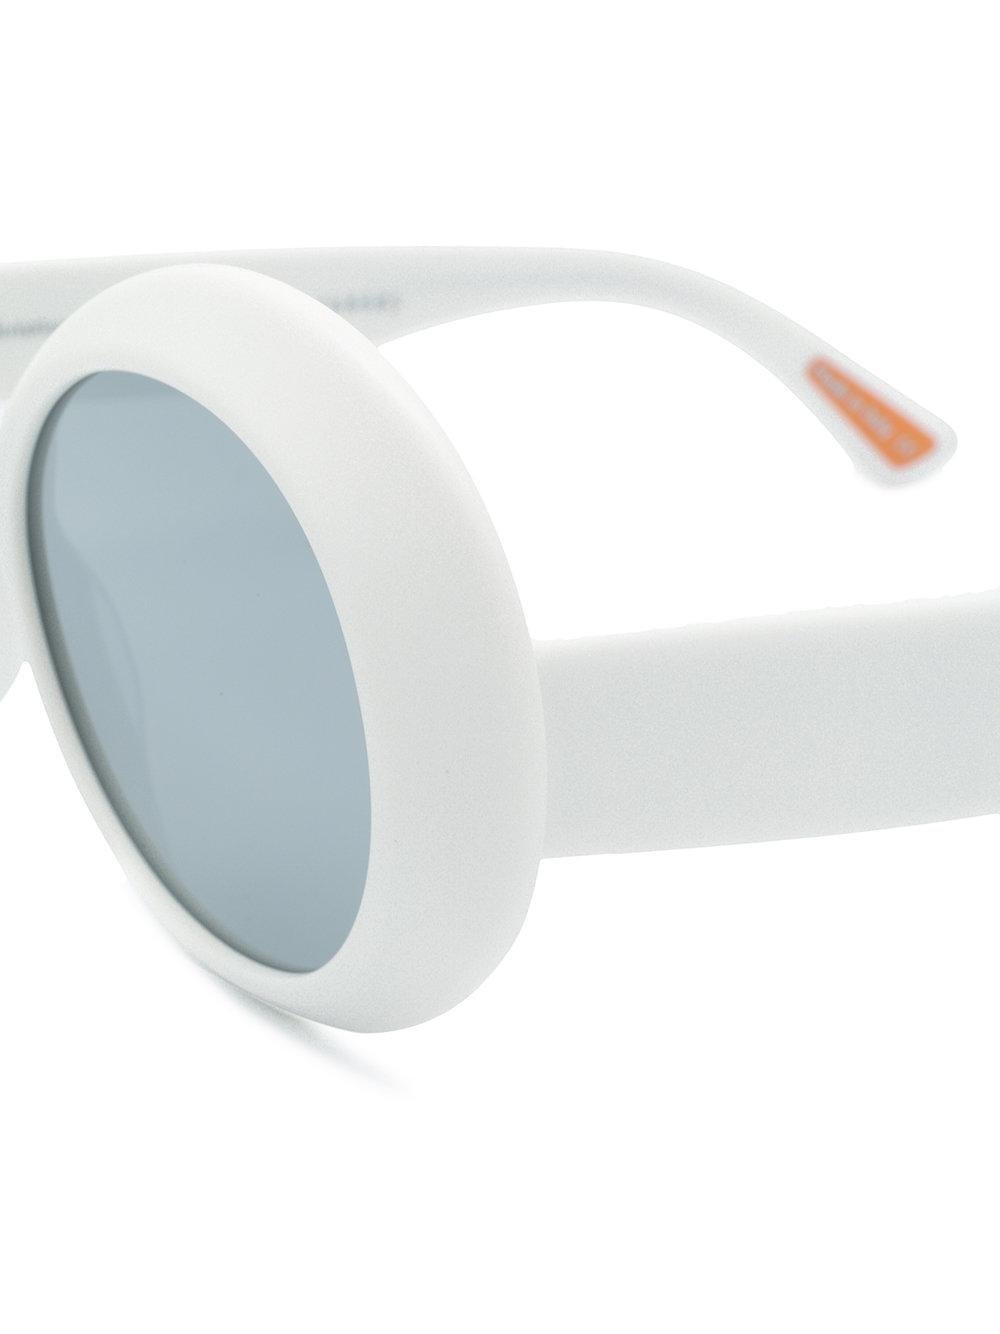 Christian Roth Archive 1993 Sunglasses in White | Lyst